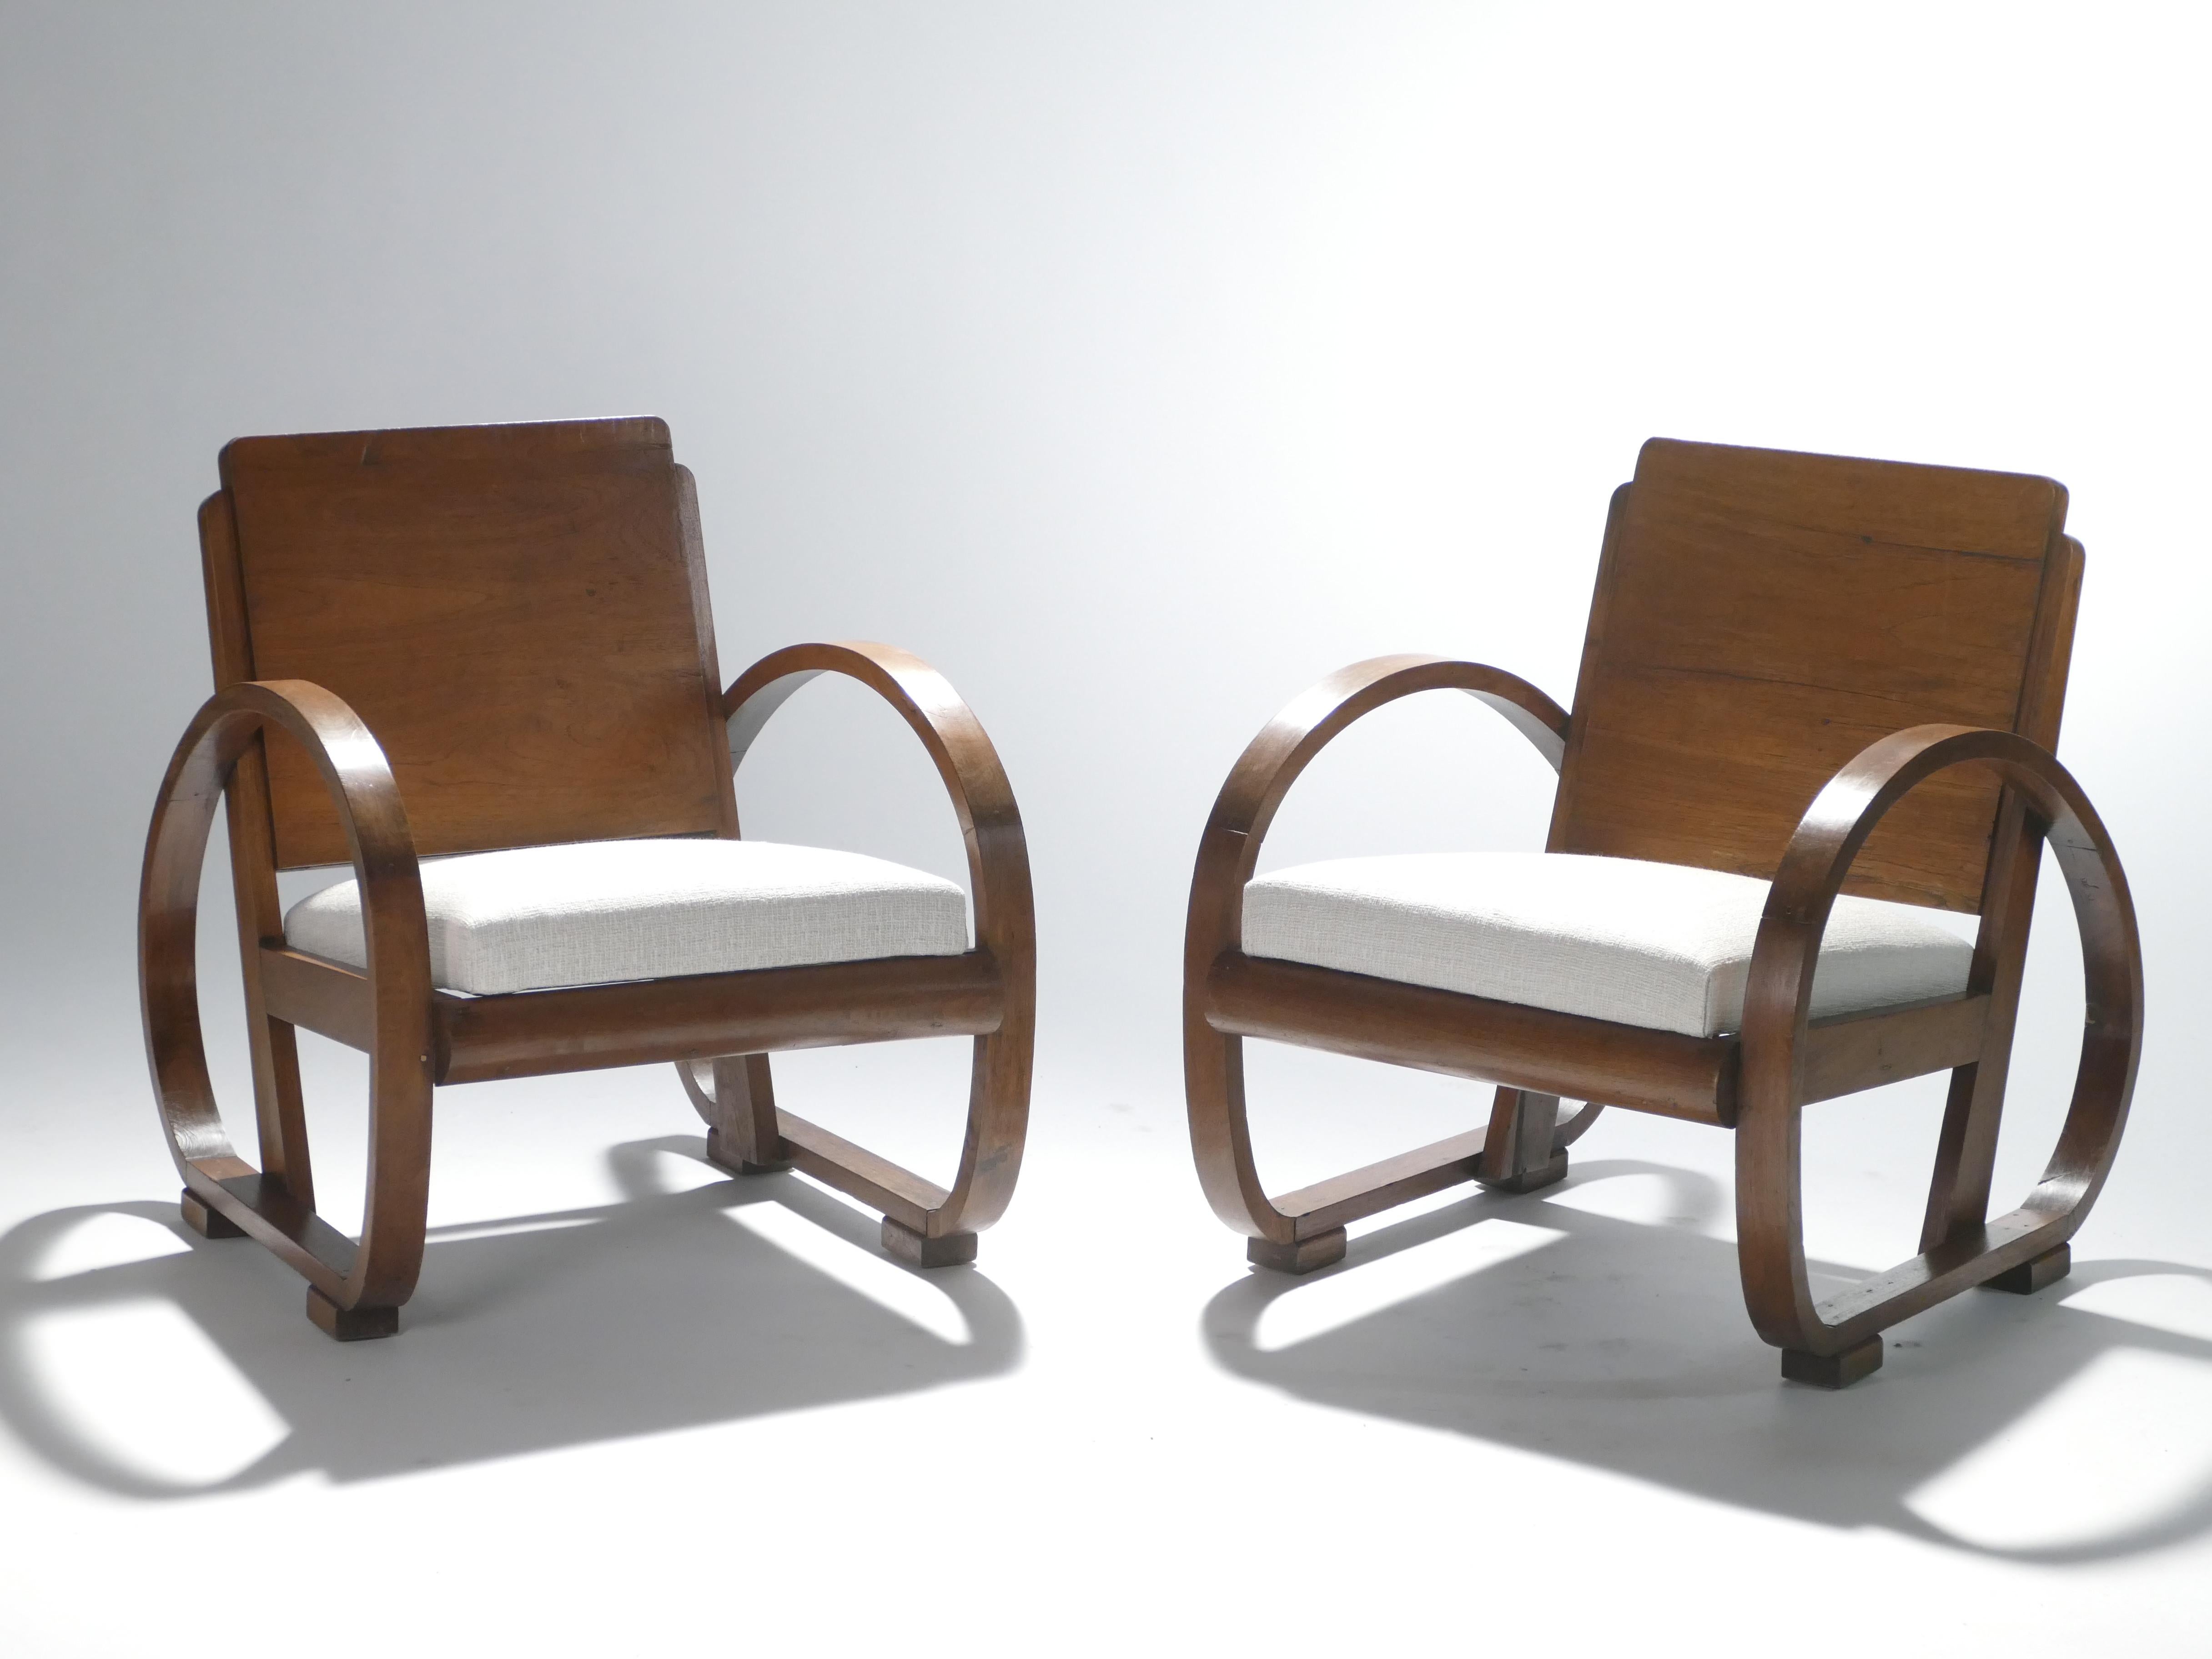 Lend your living room an unparalleled modern elegance with these 1940s armchairs. The arresting structure, rich creamy colors, and quality material make these pieces a stunning example of French art deco modernism. Lovely mahogany wood forms the